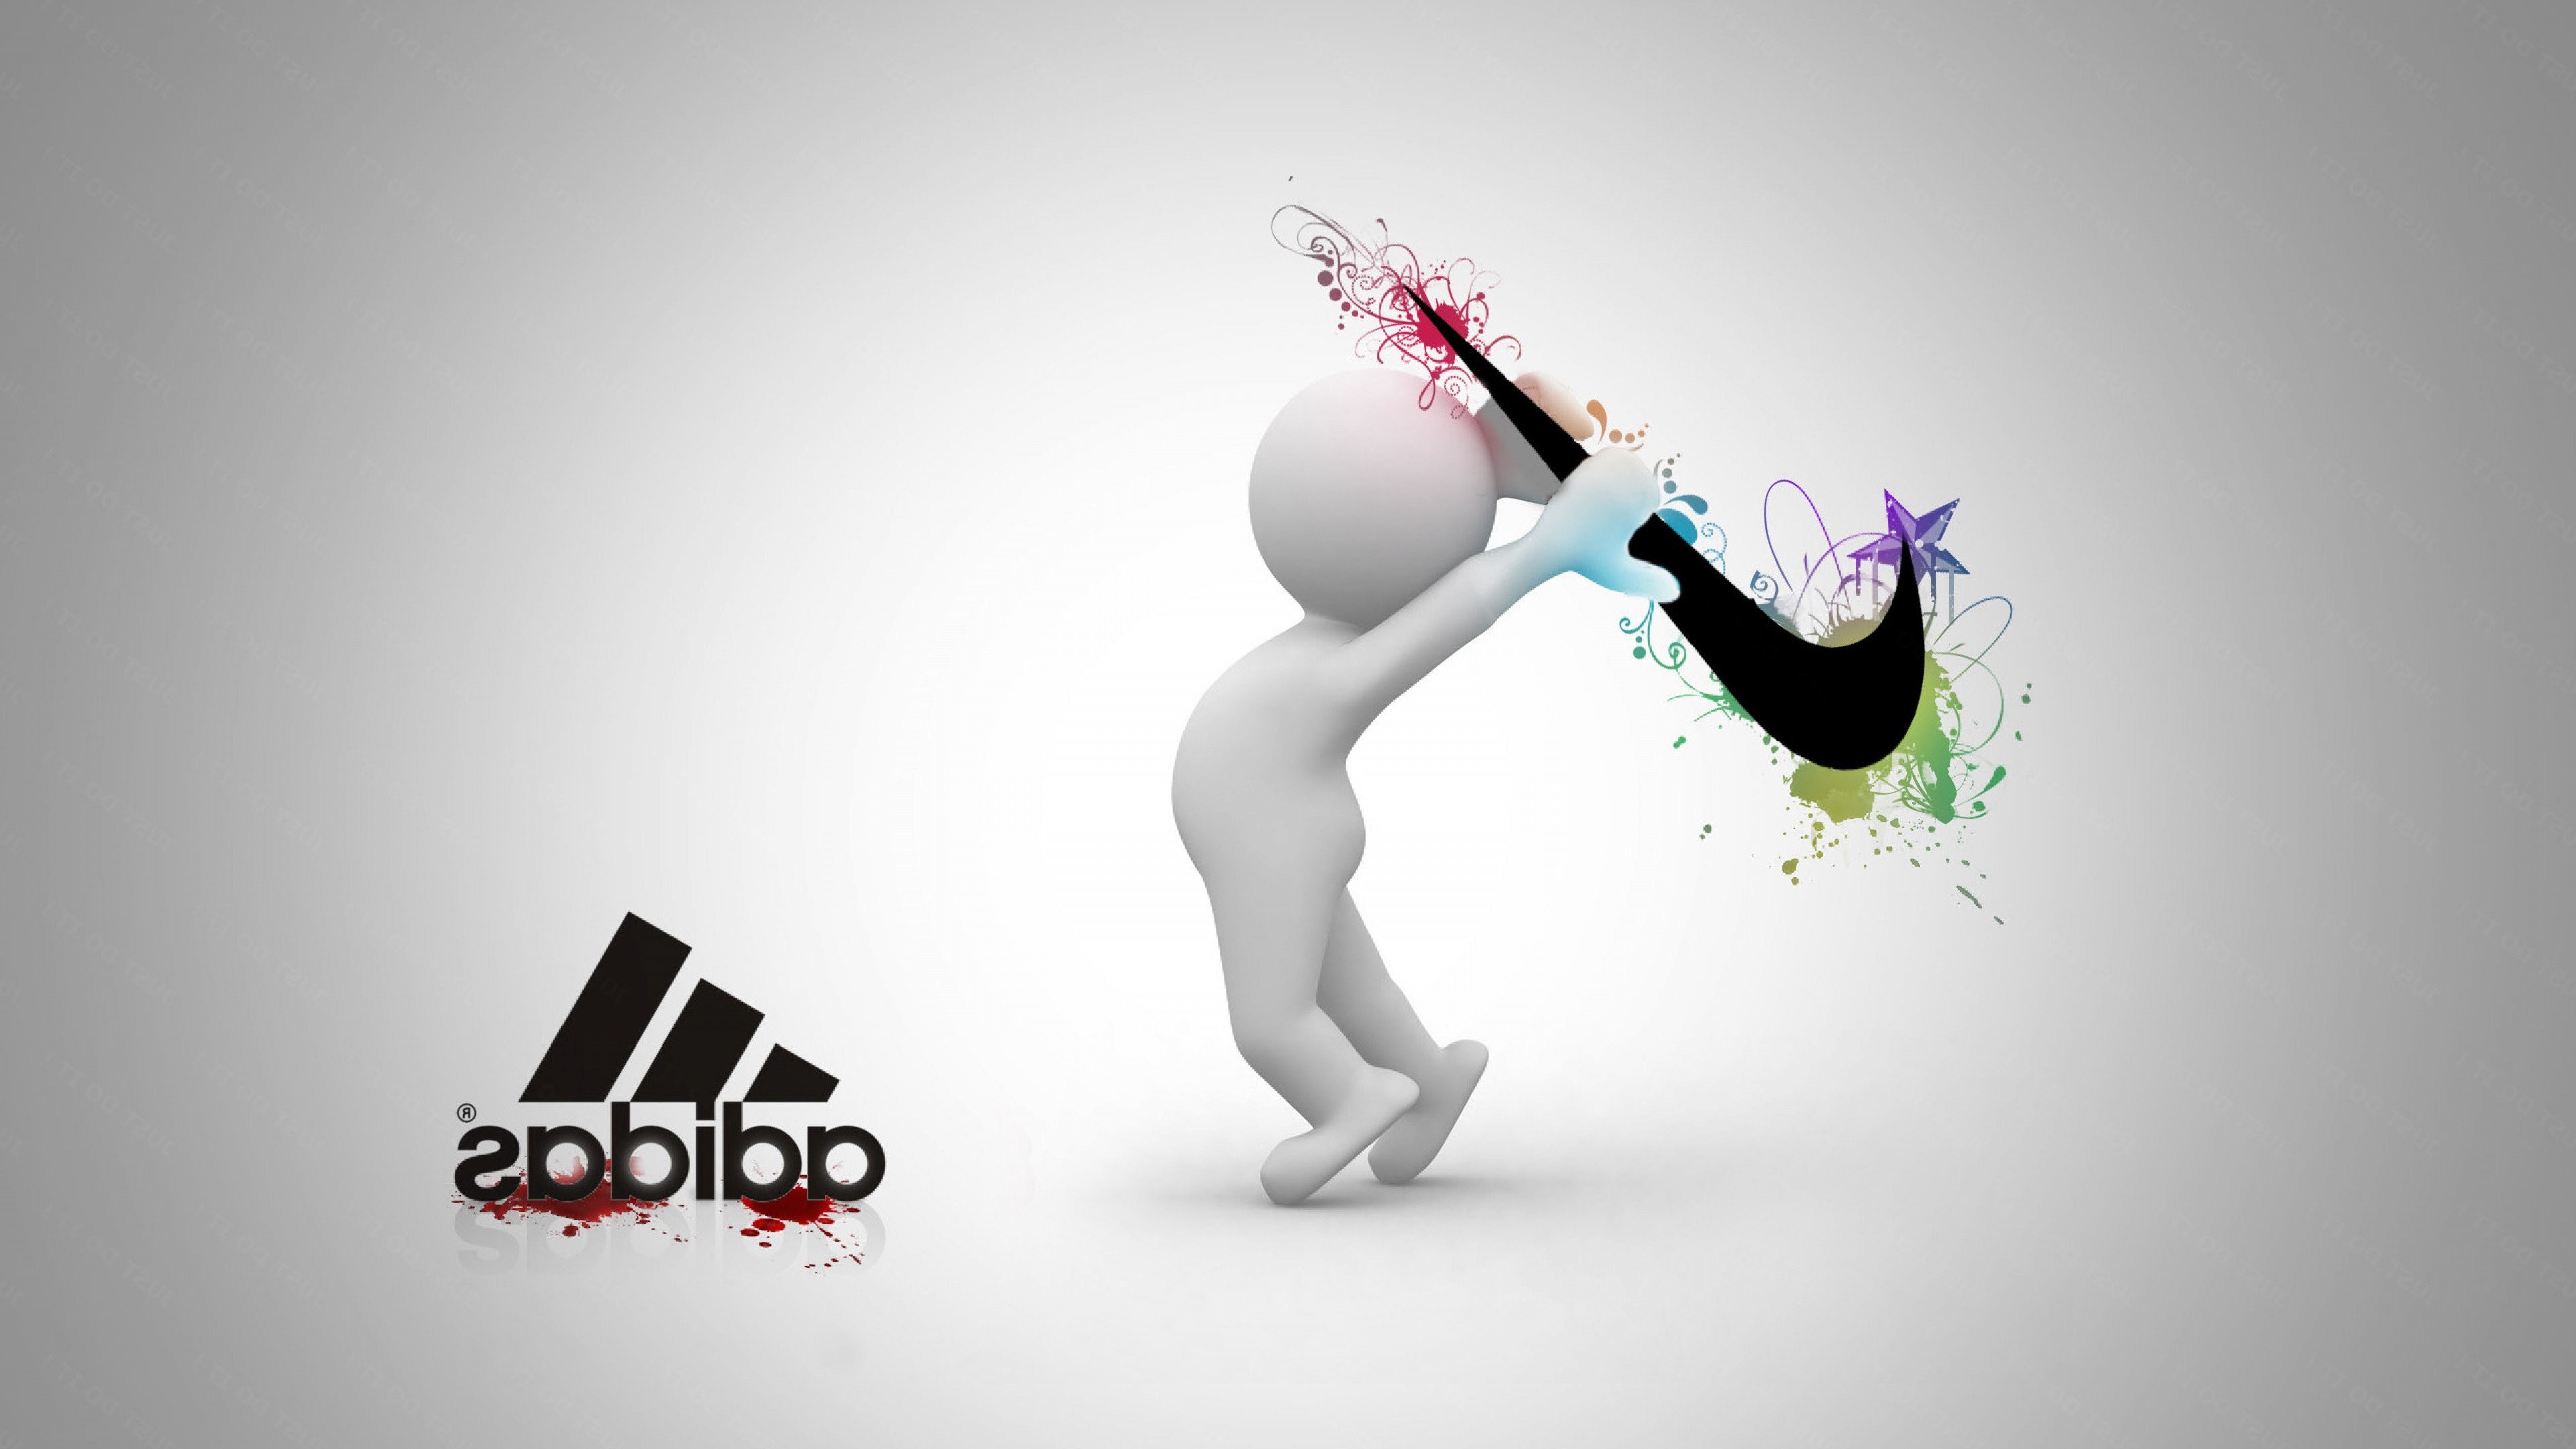 3840x2160 nike vs adidas wallpapers hd desktop wallpapers hd high definition windows  10 mac apple colourful images backgrounds free 3840Ã2160 Wallpaper HD